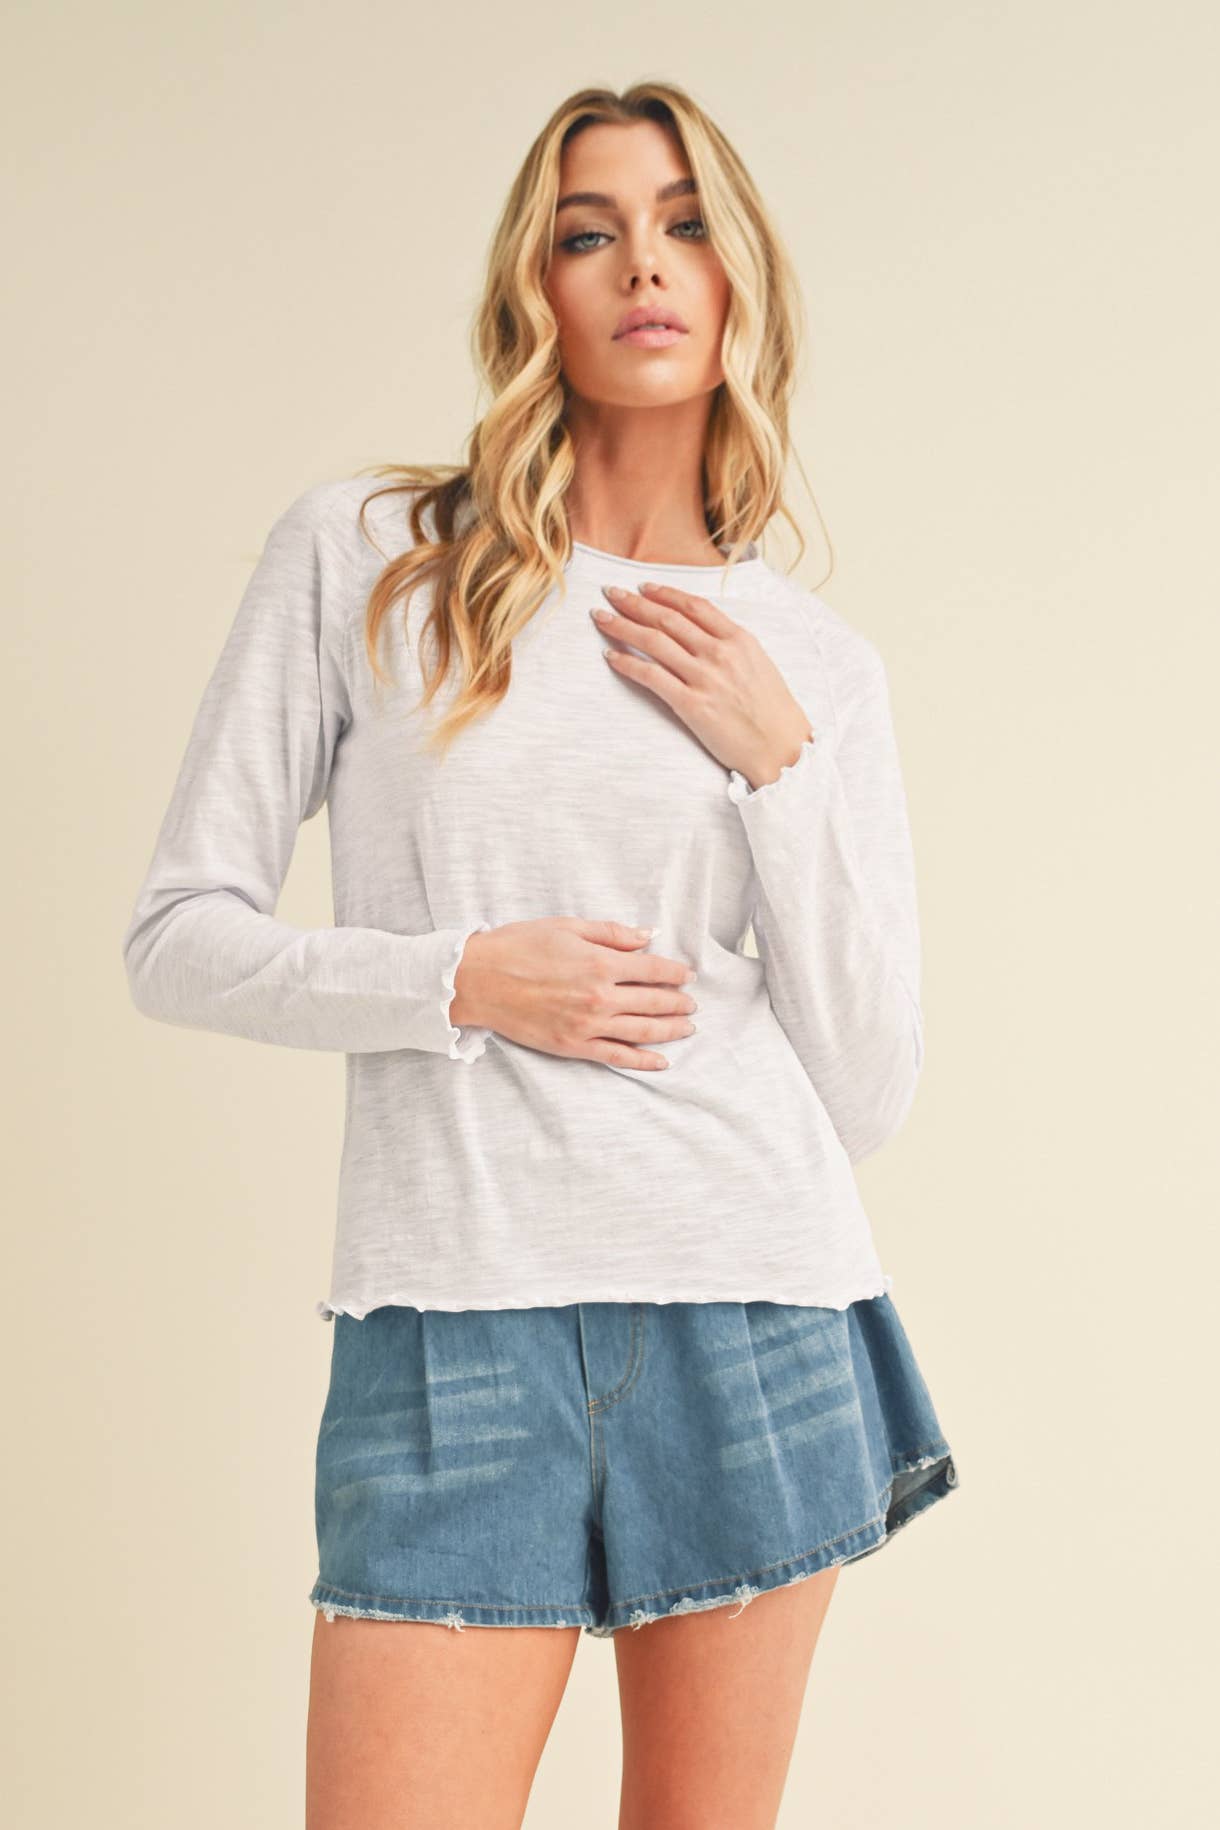 Ruffle Some Feathers Long Sleeve